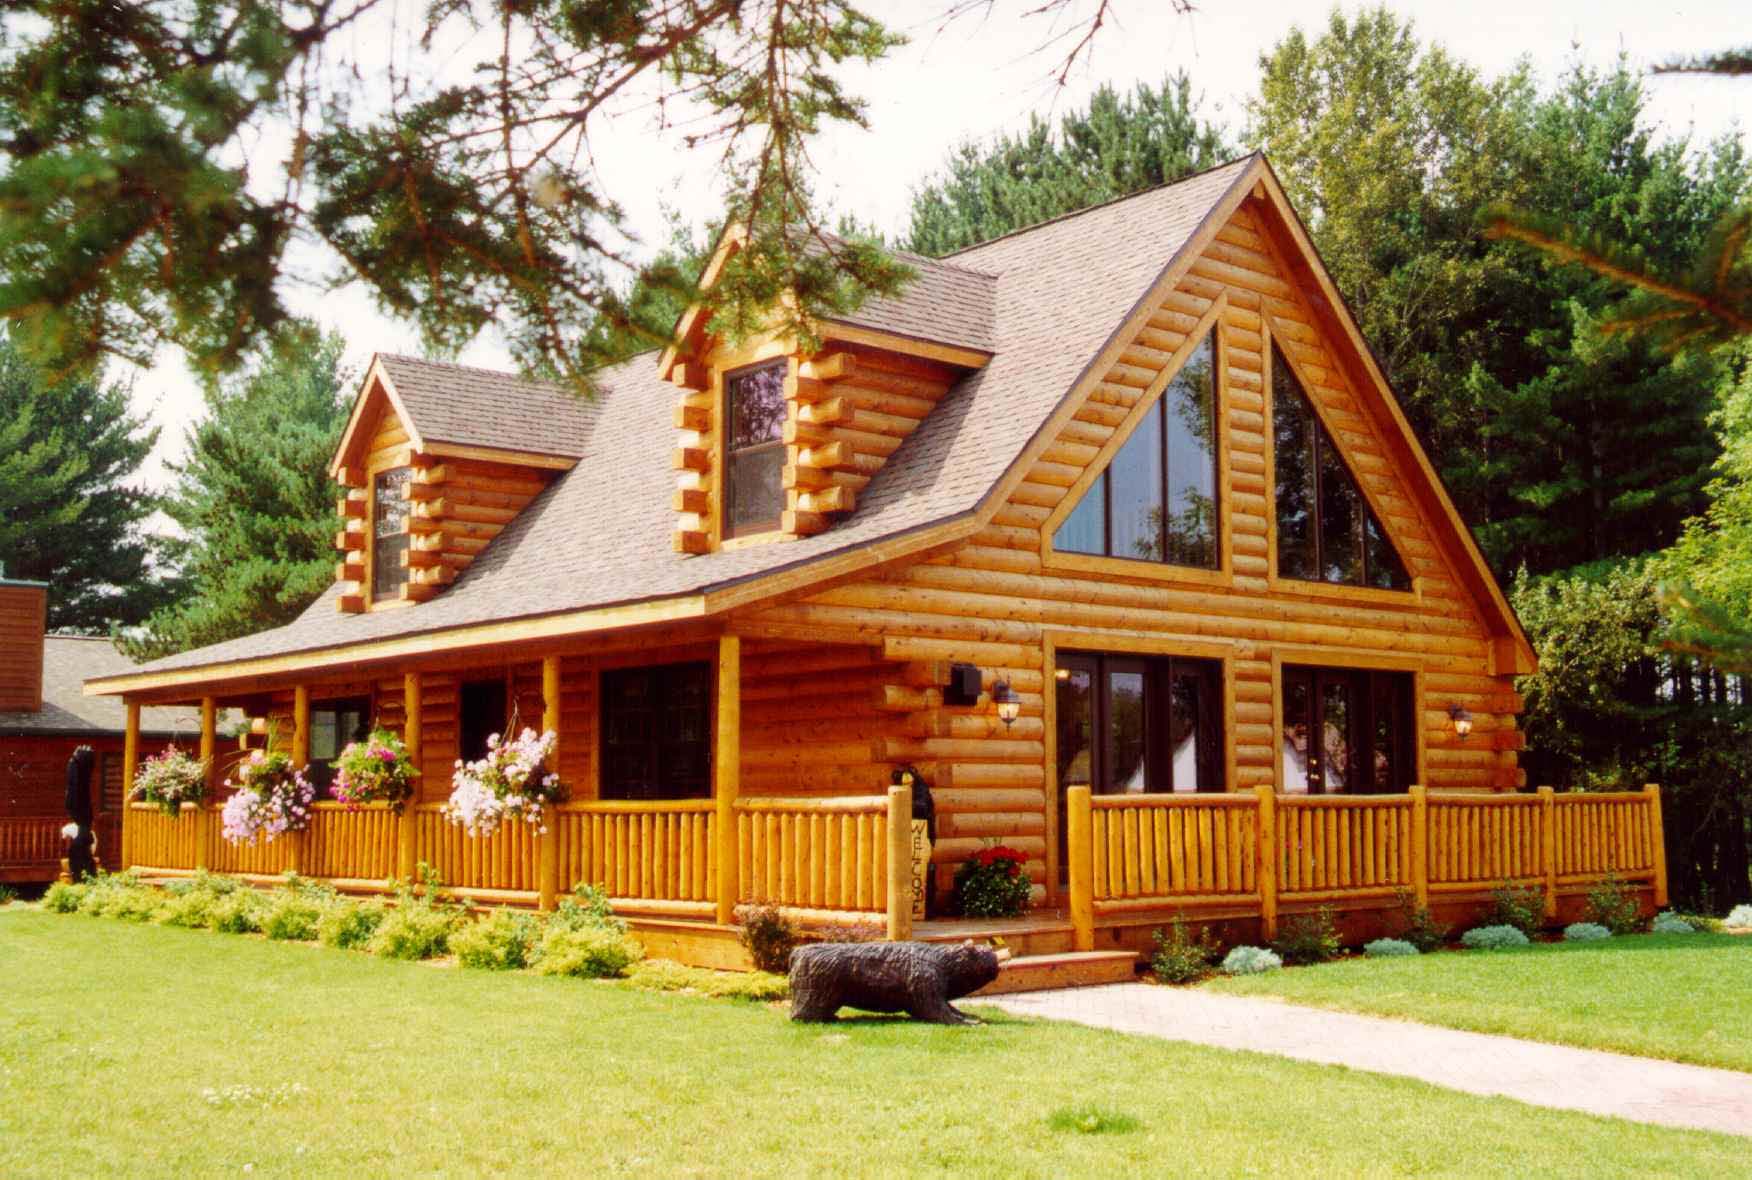 What is a Chalet Style Home?